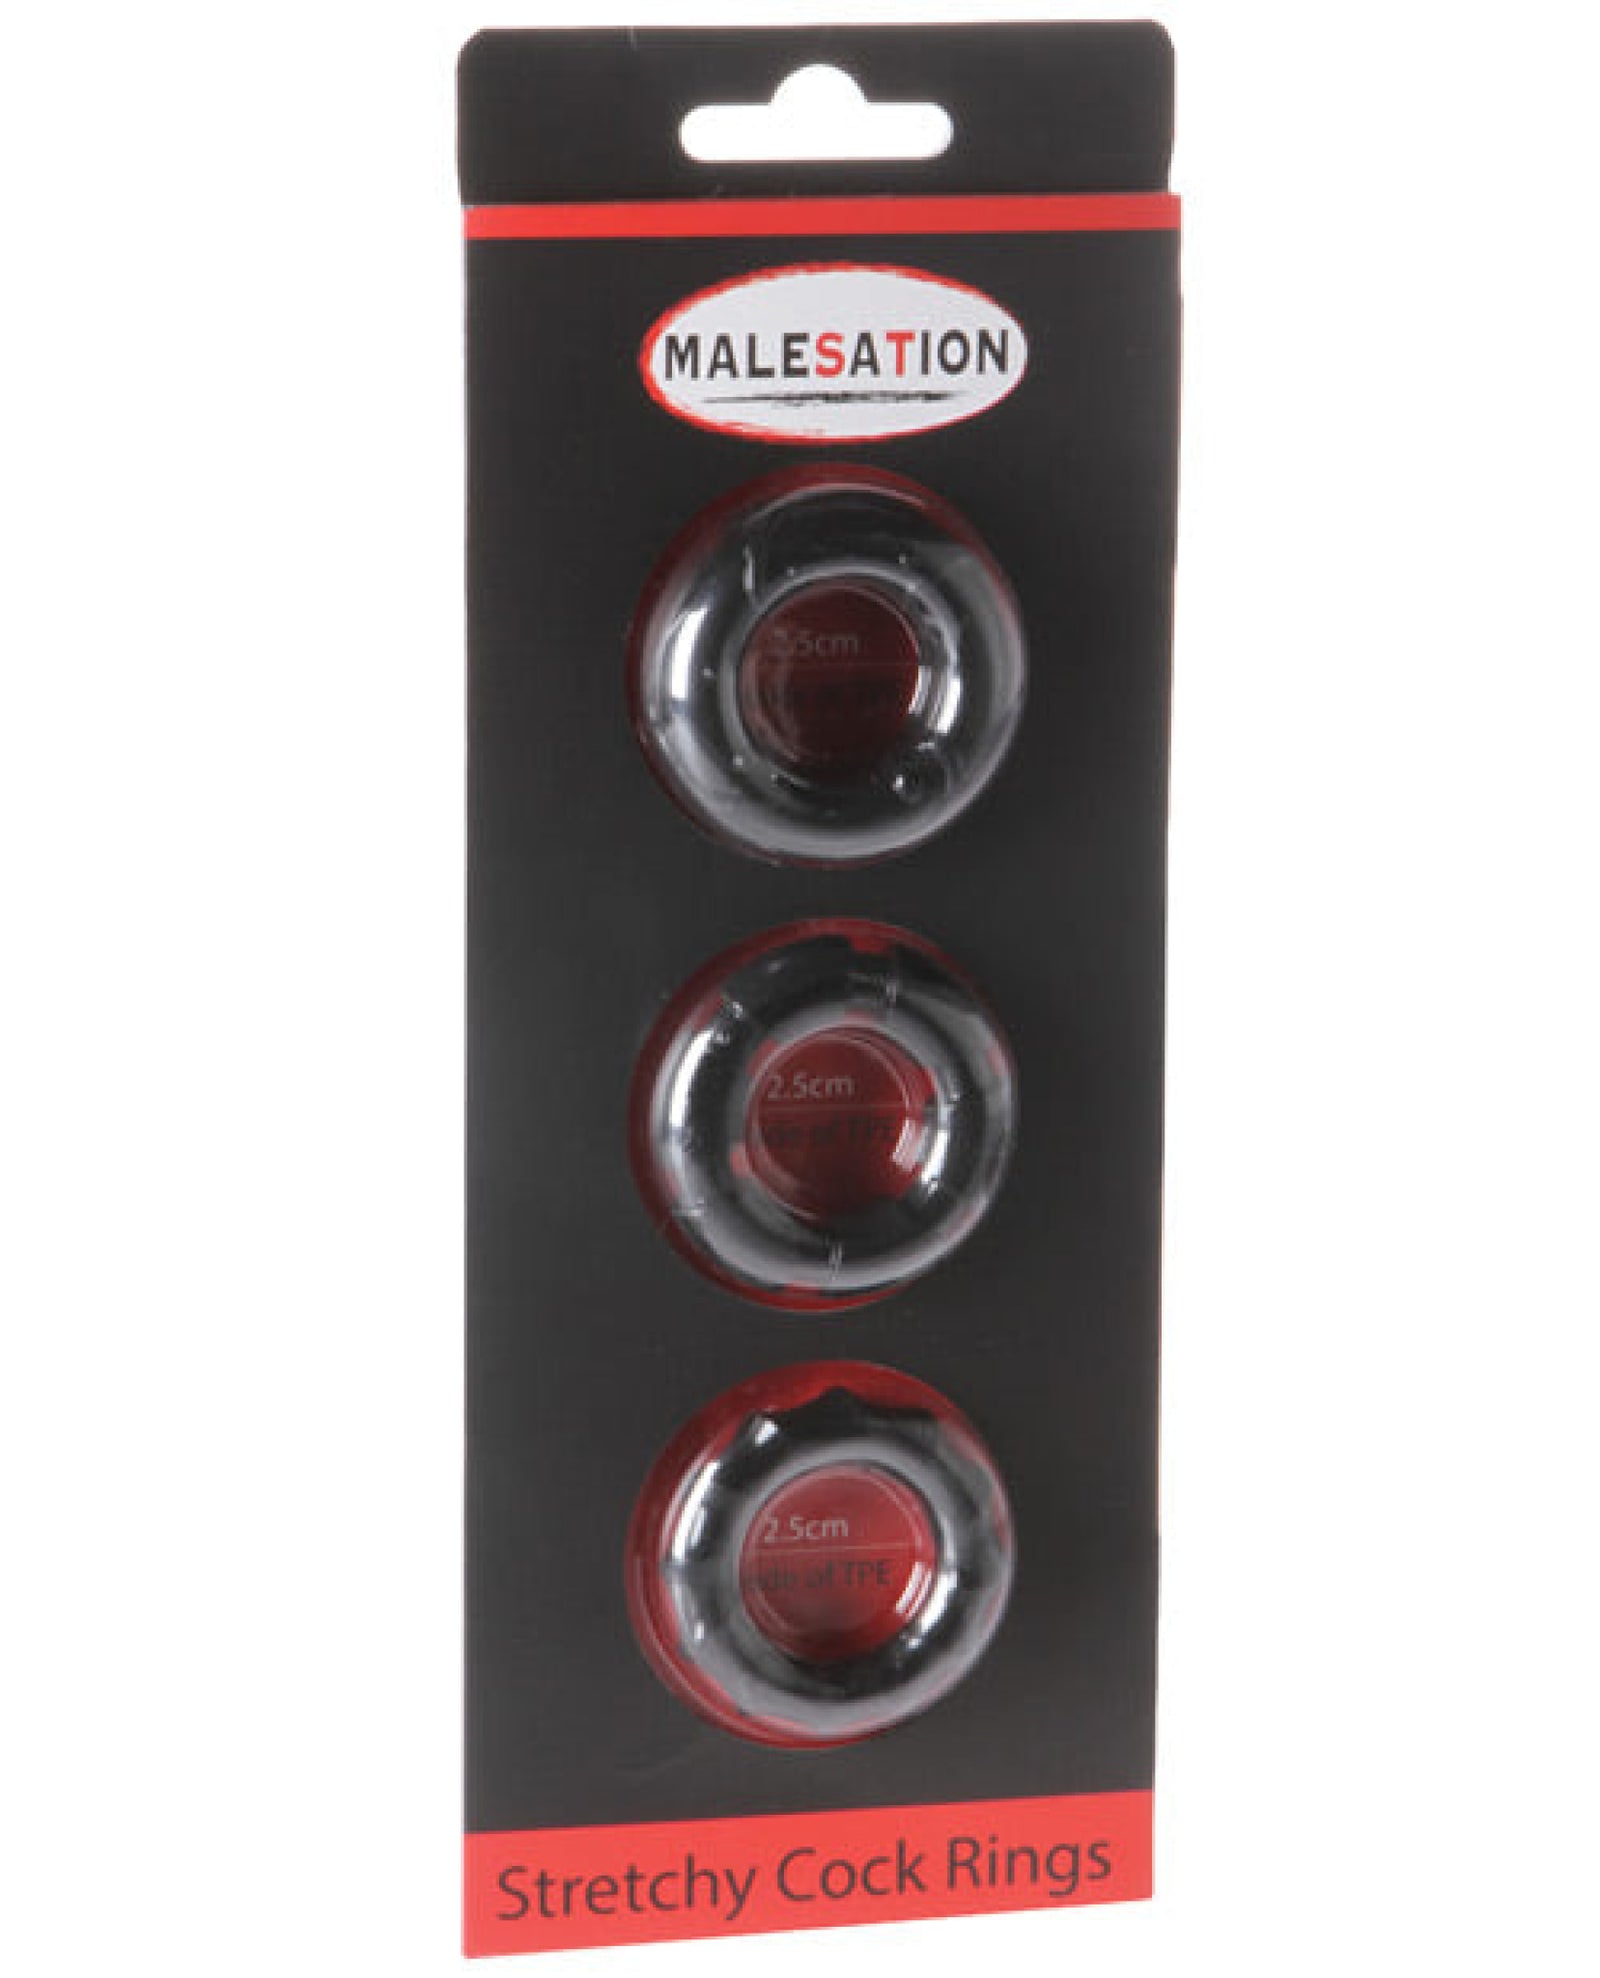 Malesation Stretchy Cock Rings - Pack Of 3 Black Malesation